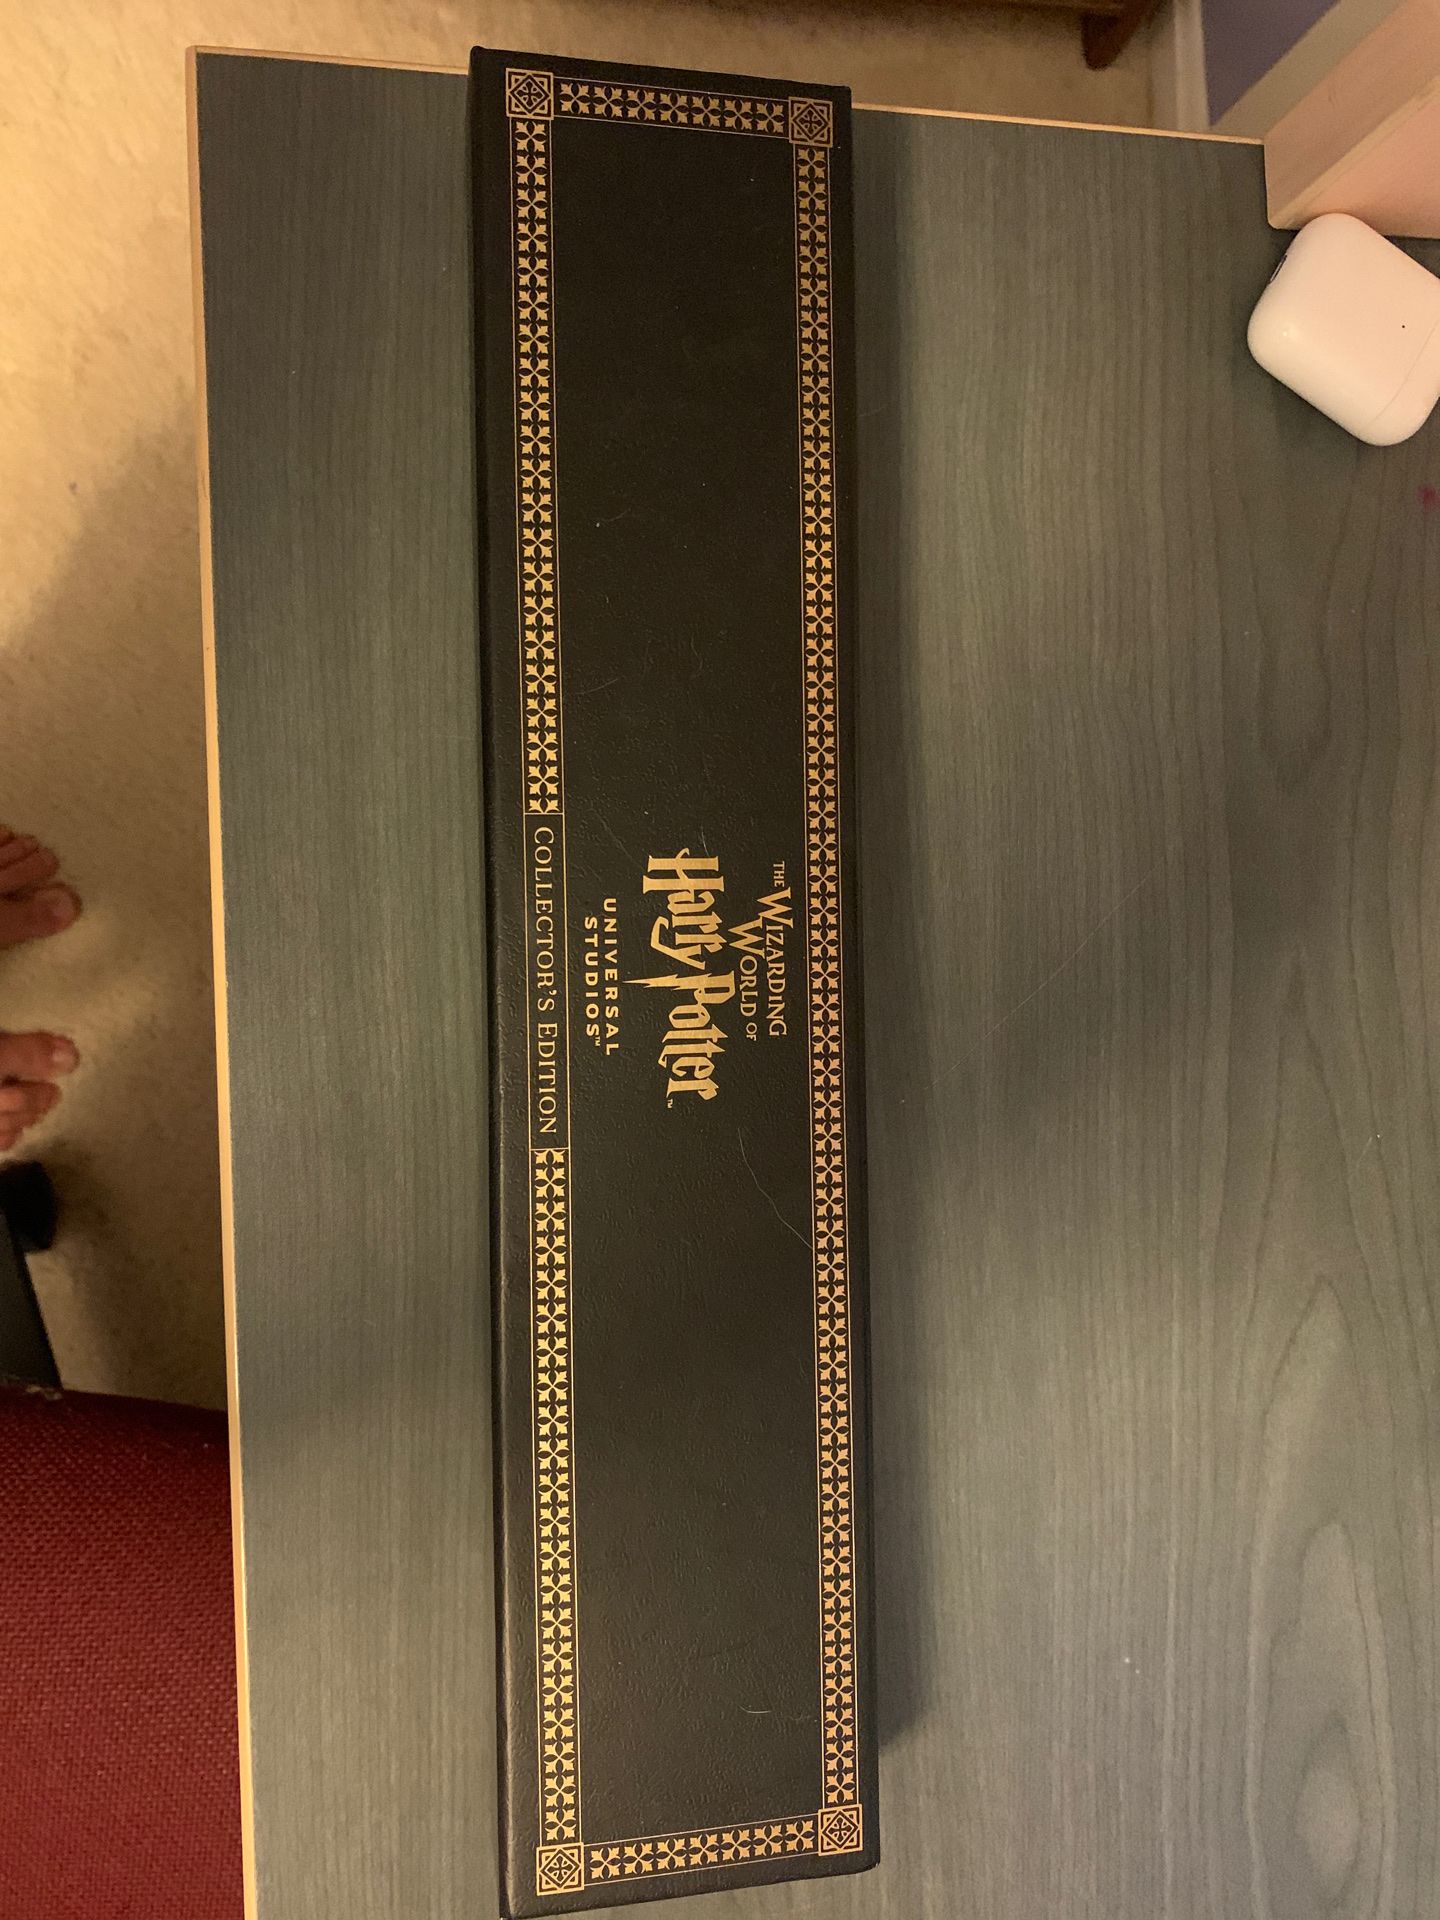 Exclusive 2019 Harry Potter wand 1 of 1000 in the world